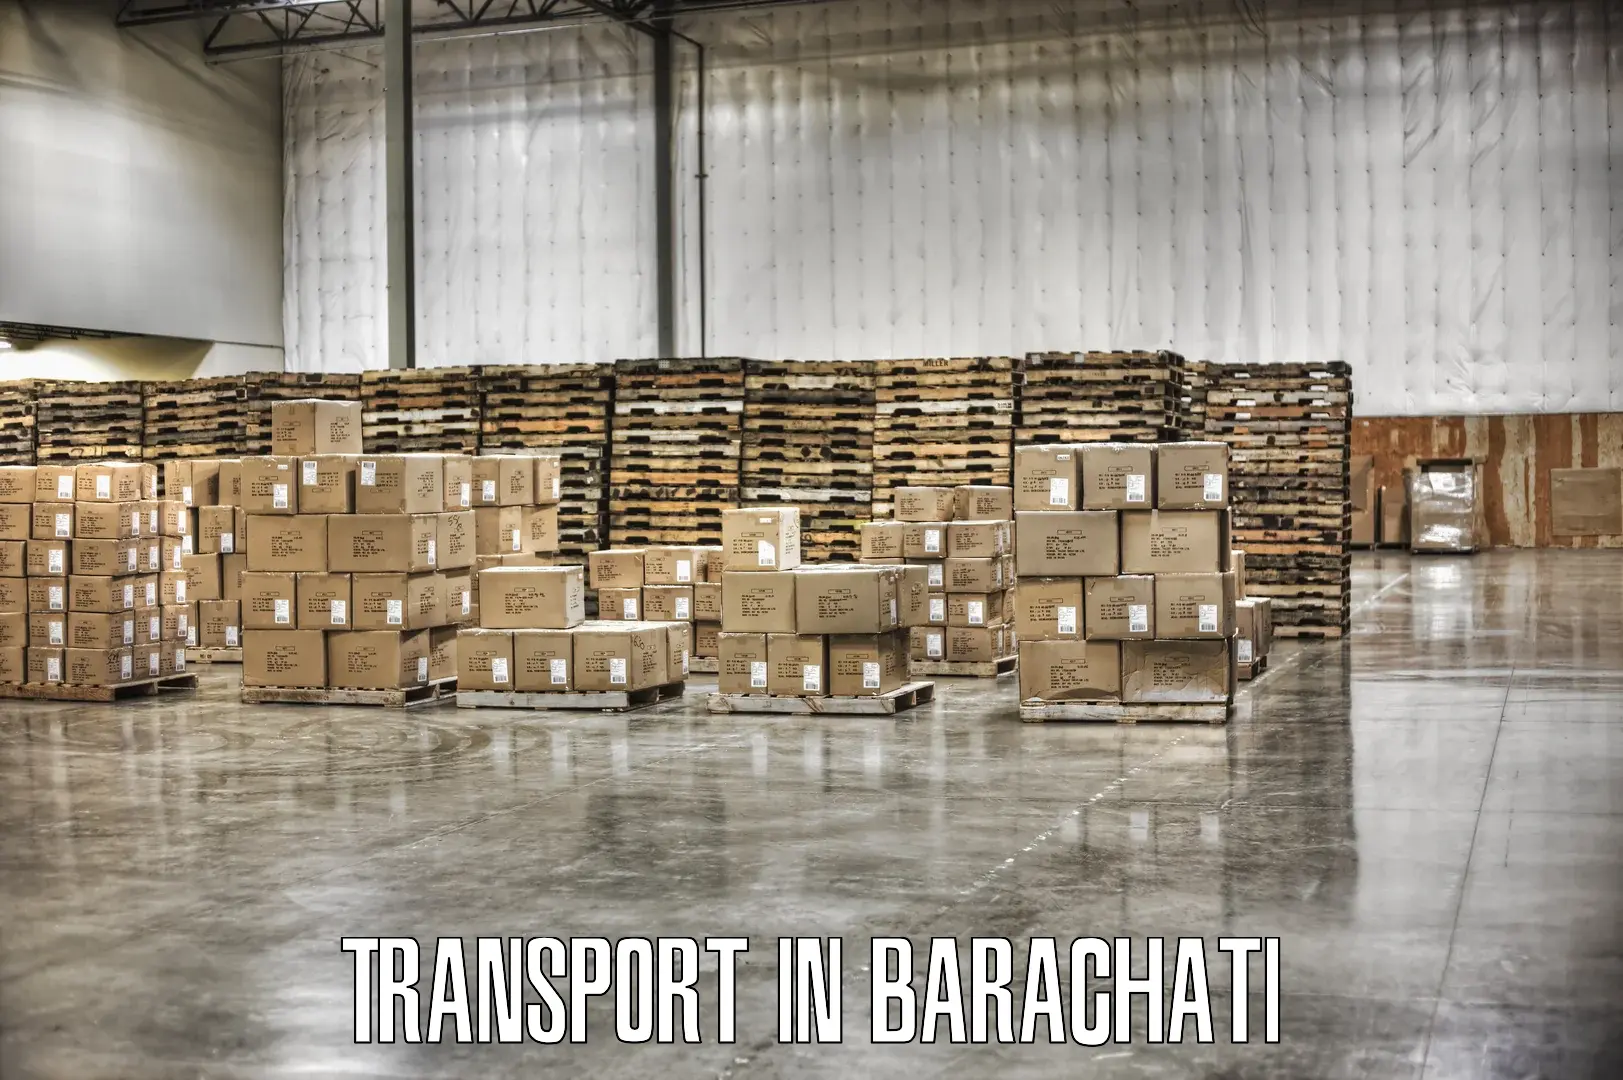 Air cargo transport services in Barachati